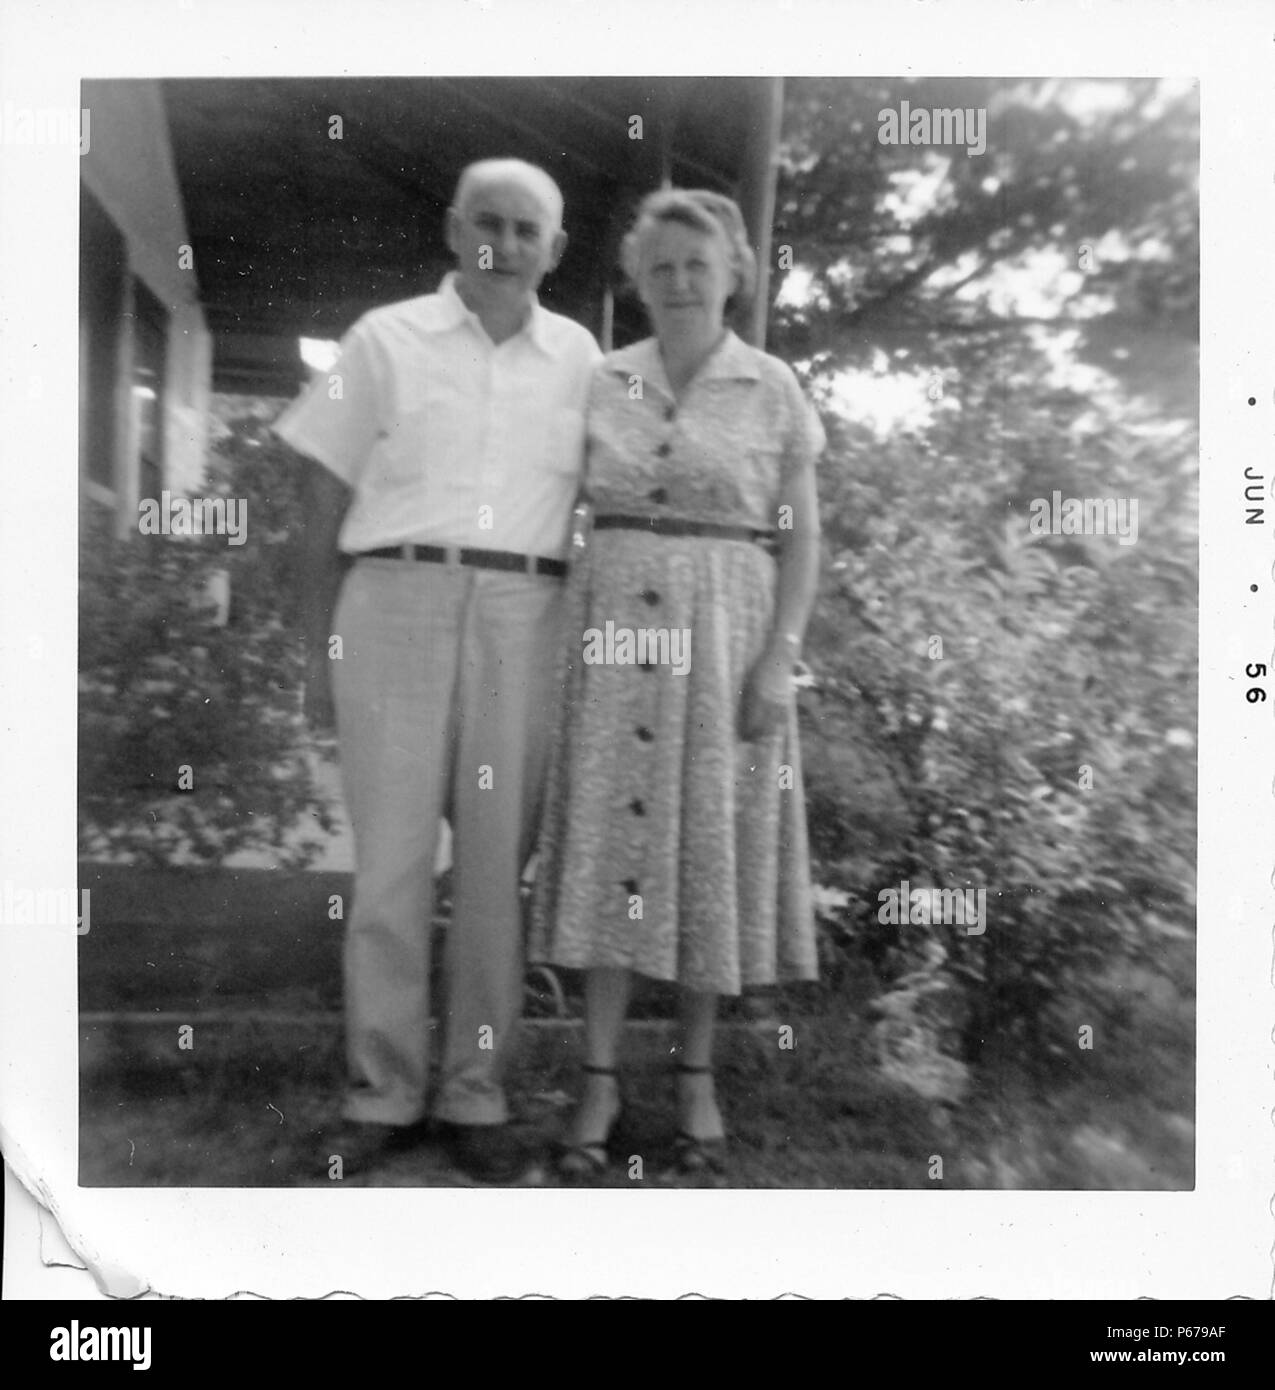 Black and white photograph, showing a man and a woman in their sixties, standing in full length, outside, facing the camera, with their arms around each other's back, and serious expressions on their faces, with foliage and part of a house visible in the background, likely photographed in Ohio, 1955. () Stock Photo